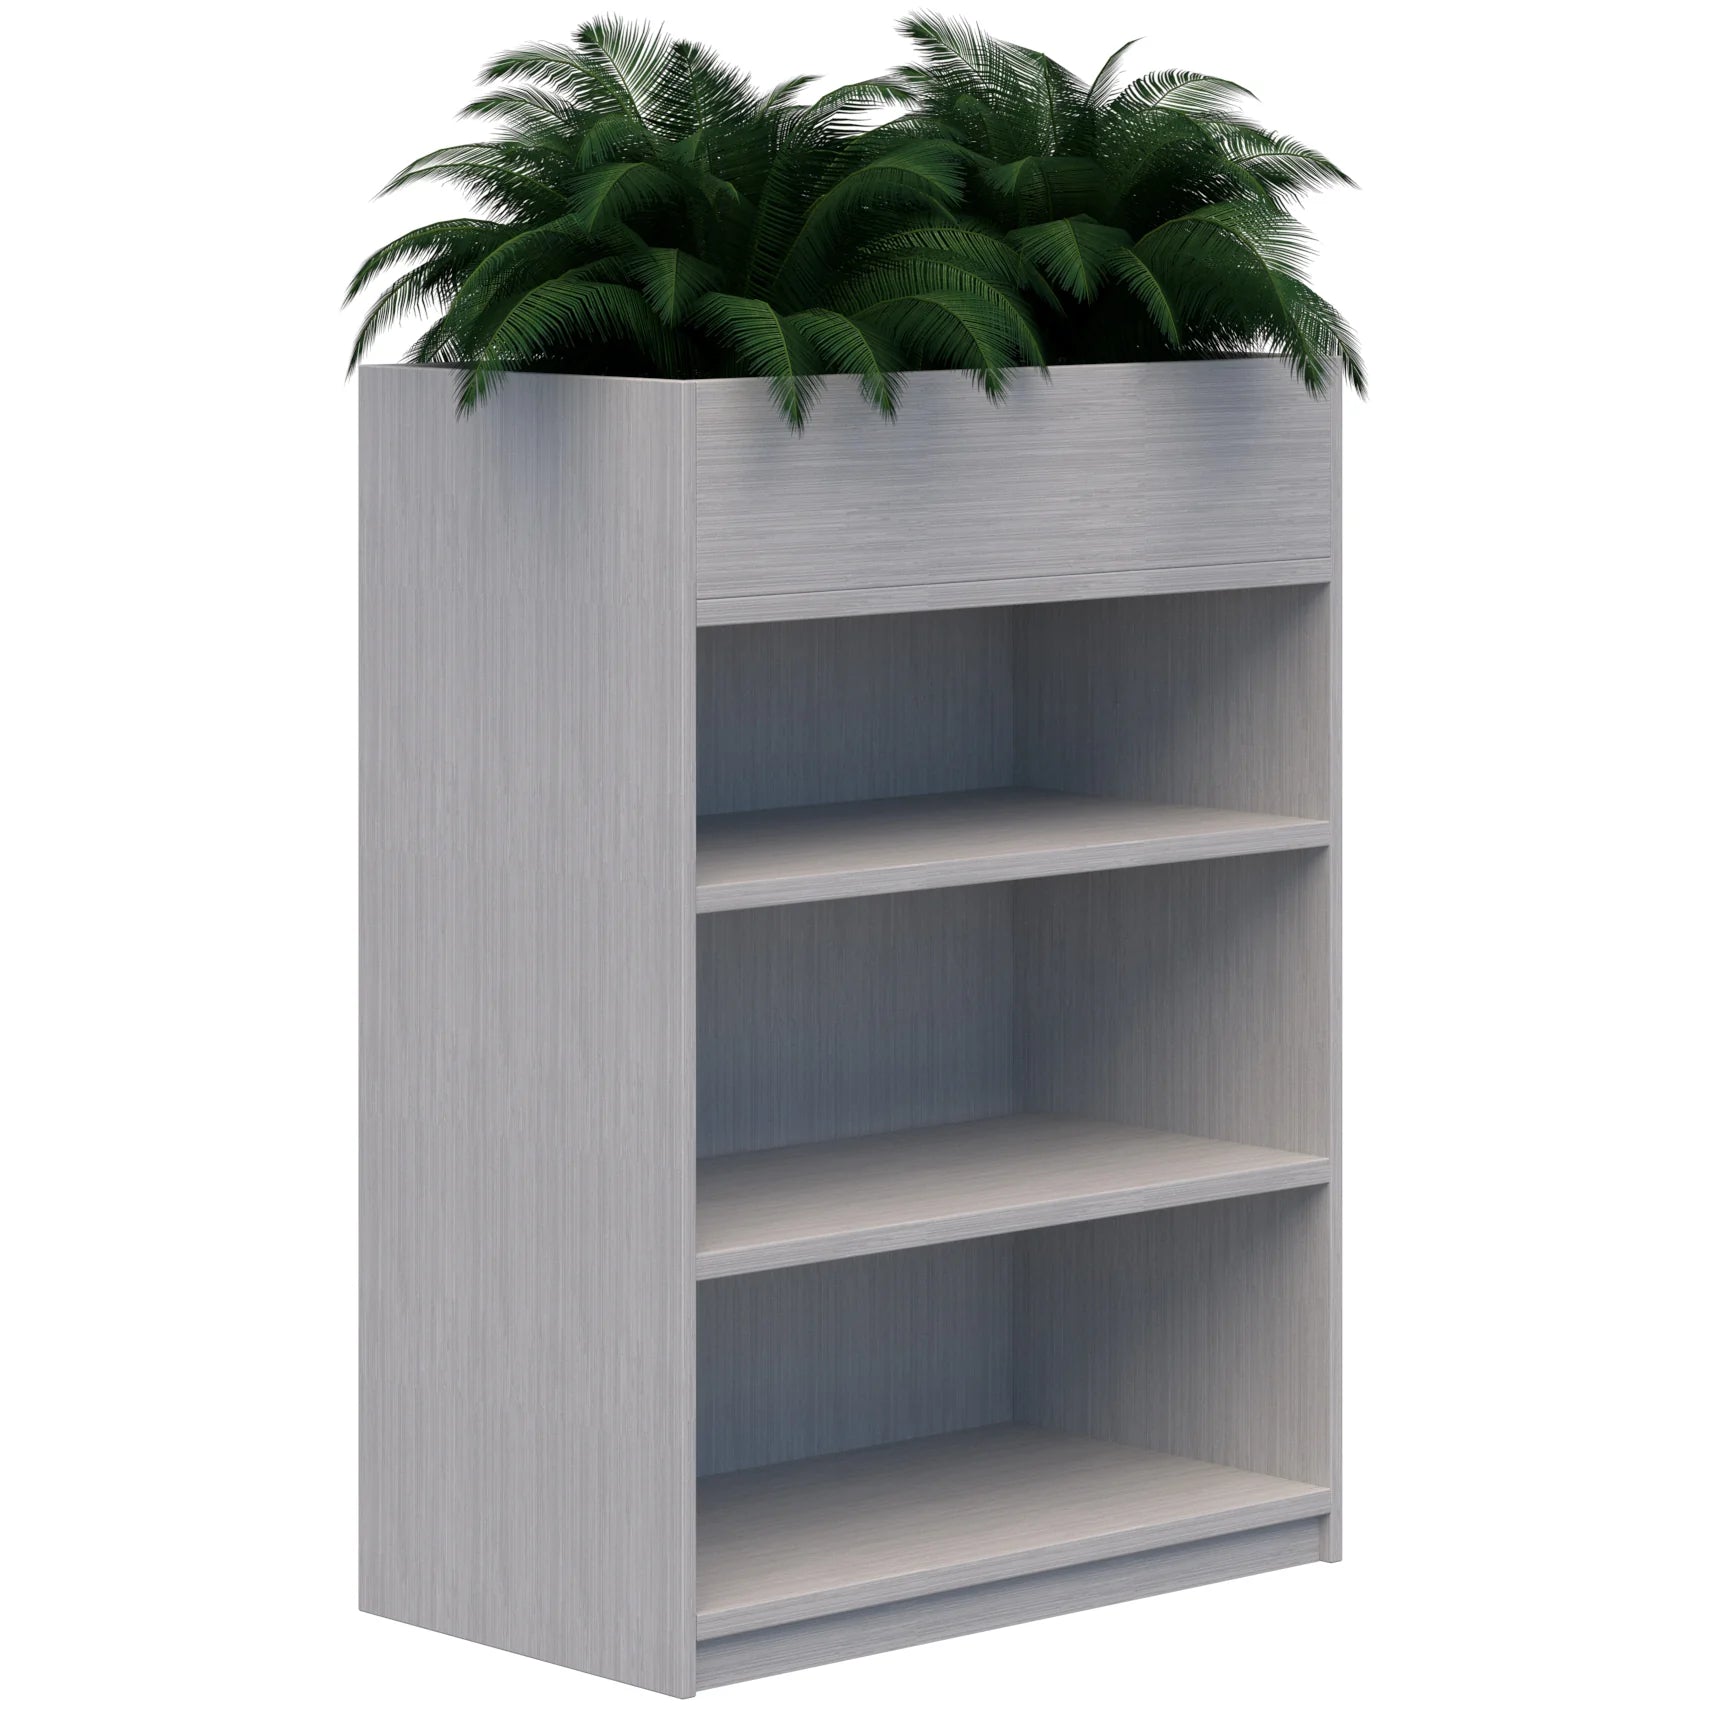 Three tier bookcase with built in planter box on top in silver strata colour.